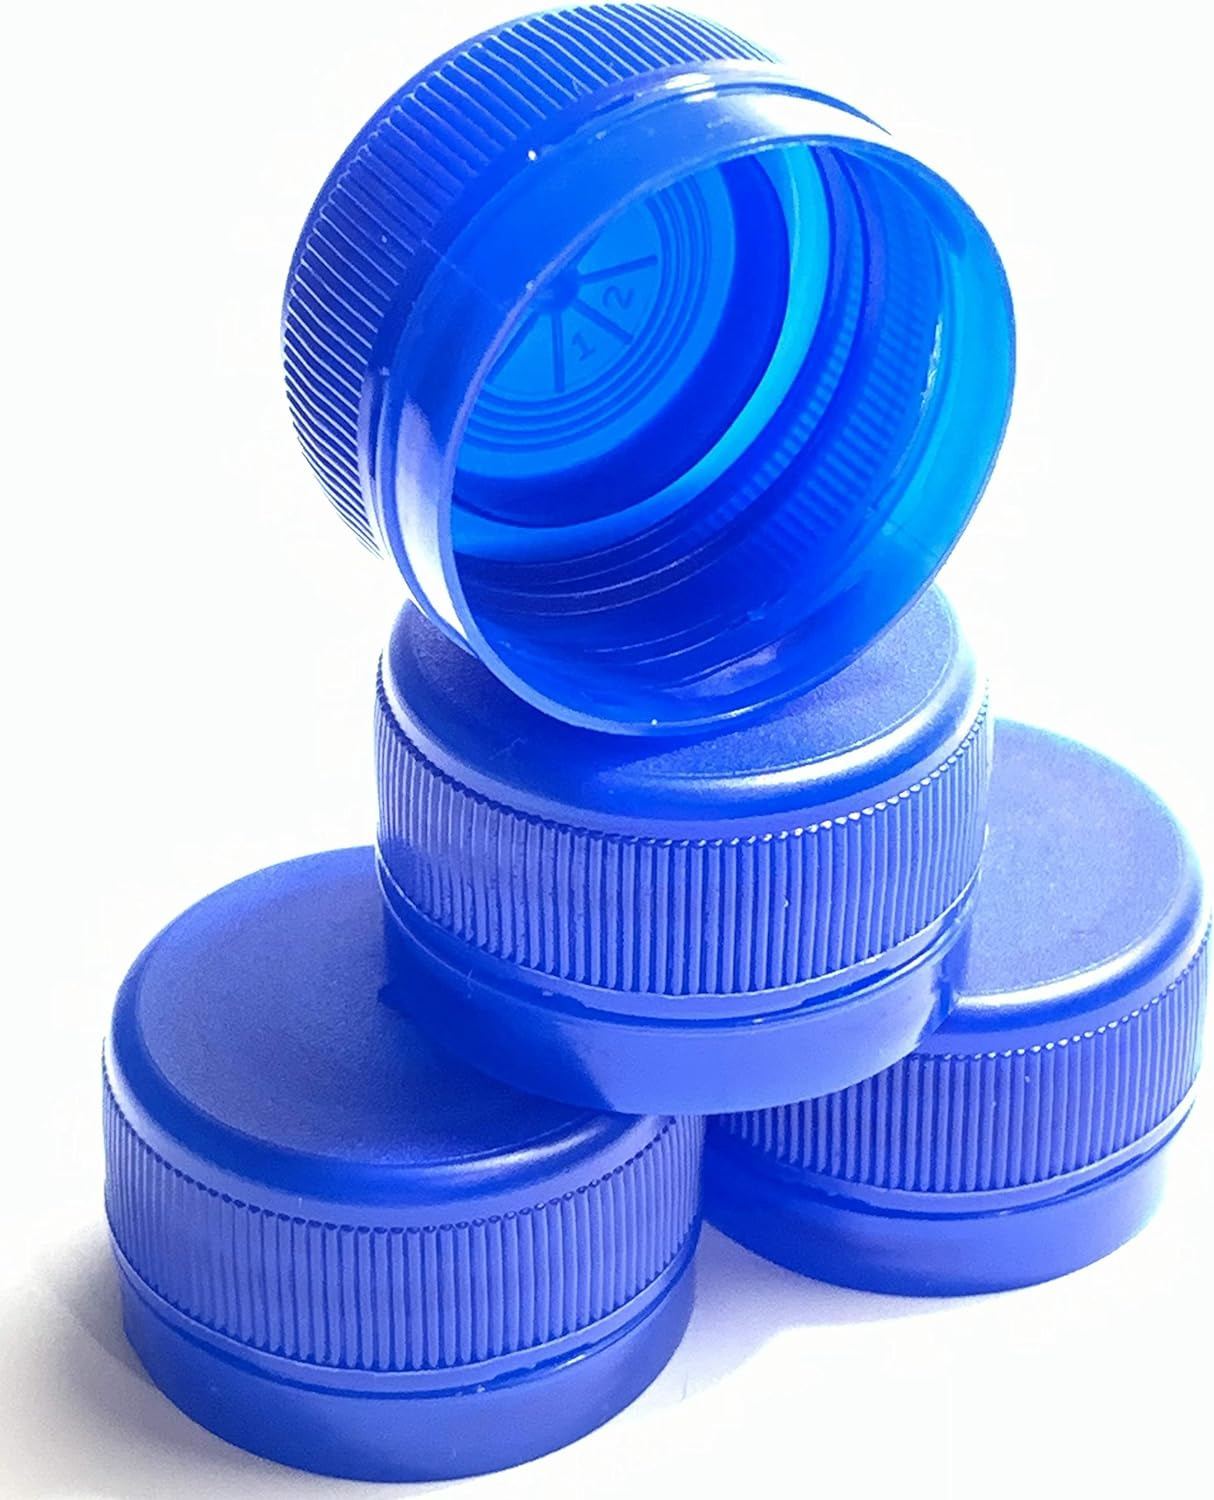 Sneak Alcohol Caps Anywhere, Reseal Your Water Bottle Perfectly 28Mm (12) | Leak